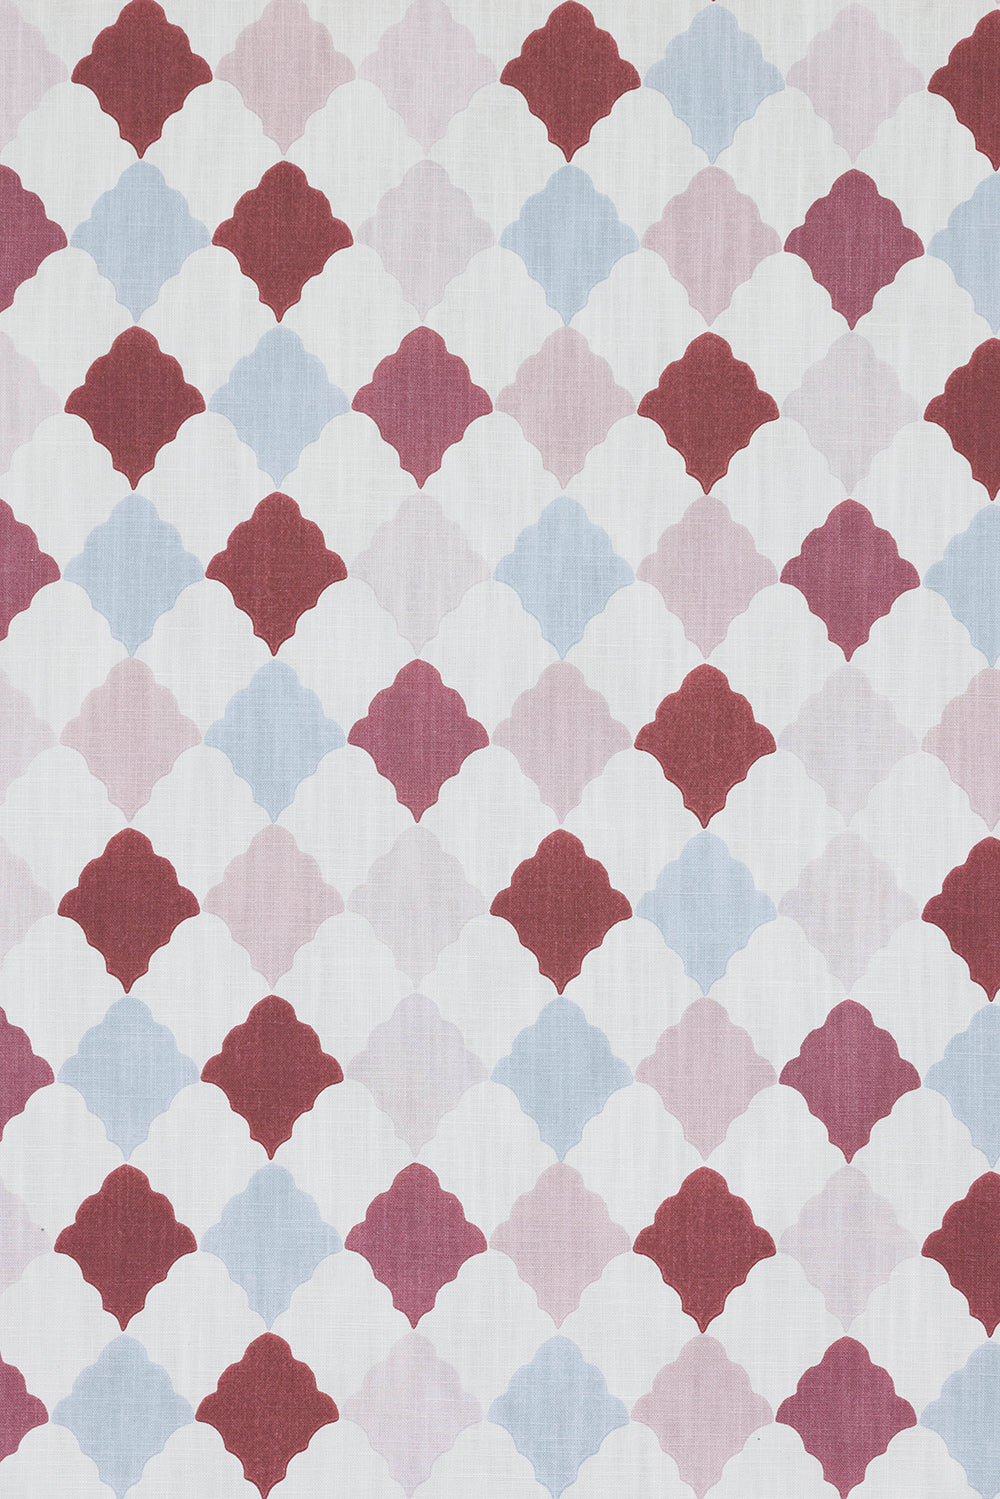 Quilted Harlequin Fabric